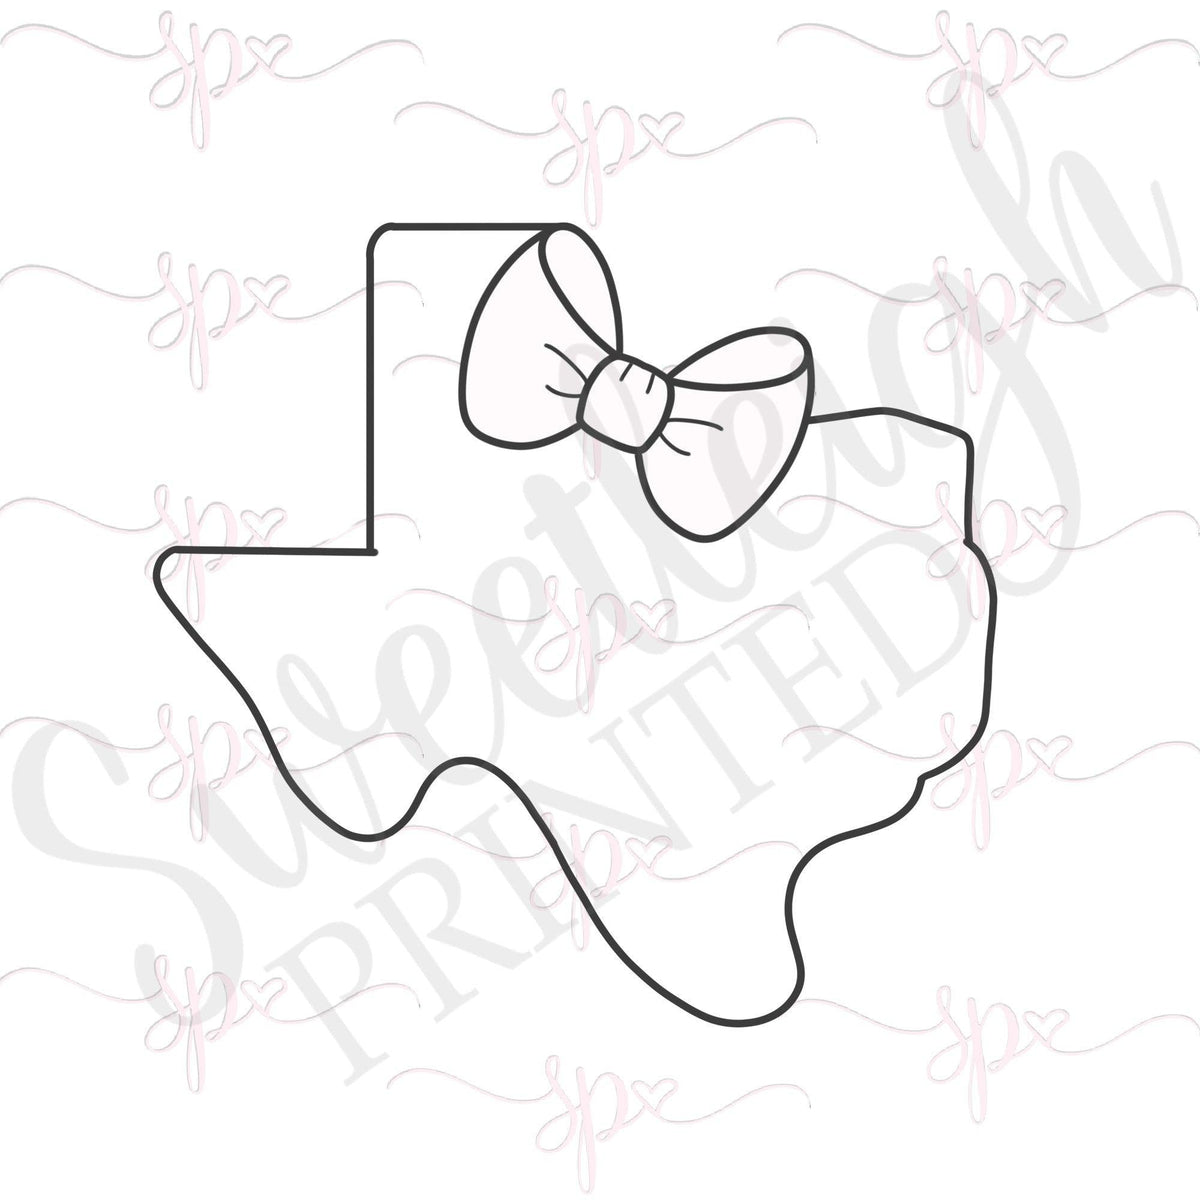 Girly Texas 1 Cookie Cutter - Sweetleigh 